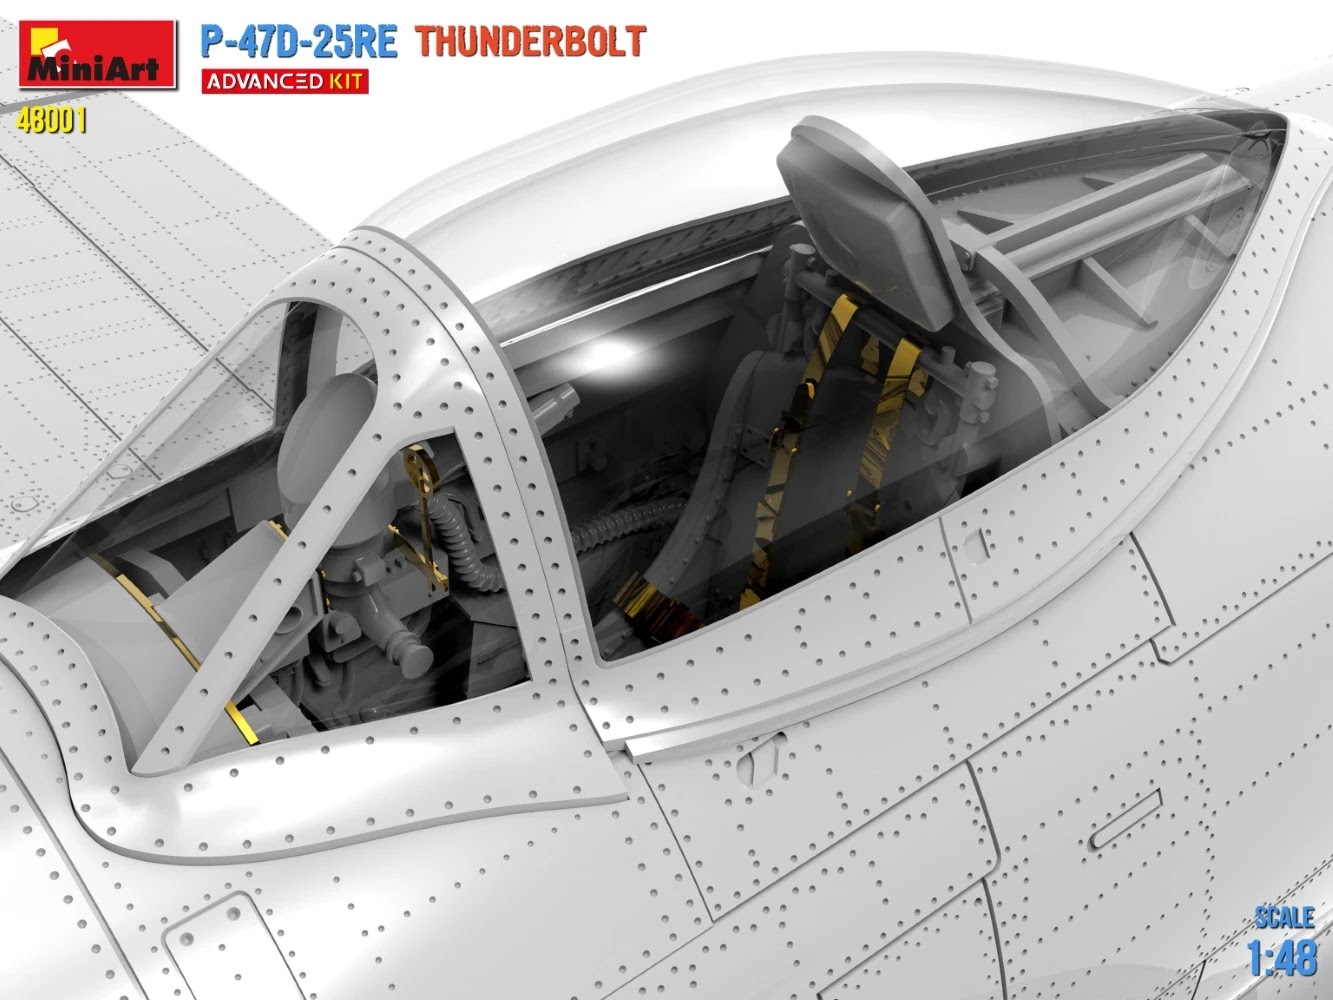 MiniArt ups the detail on their P-47D CAD Canopy Detail